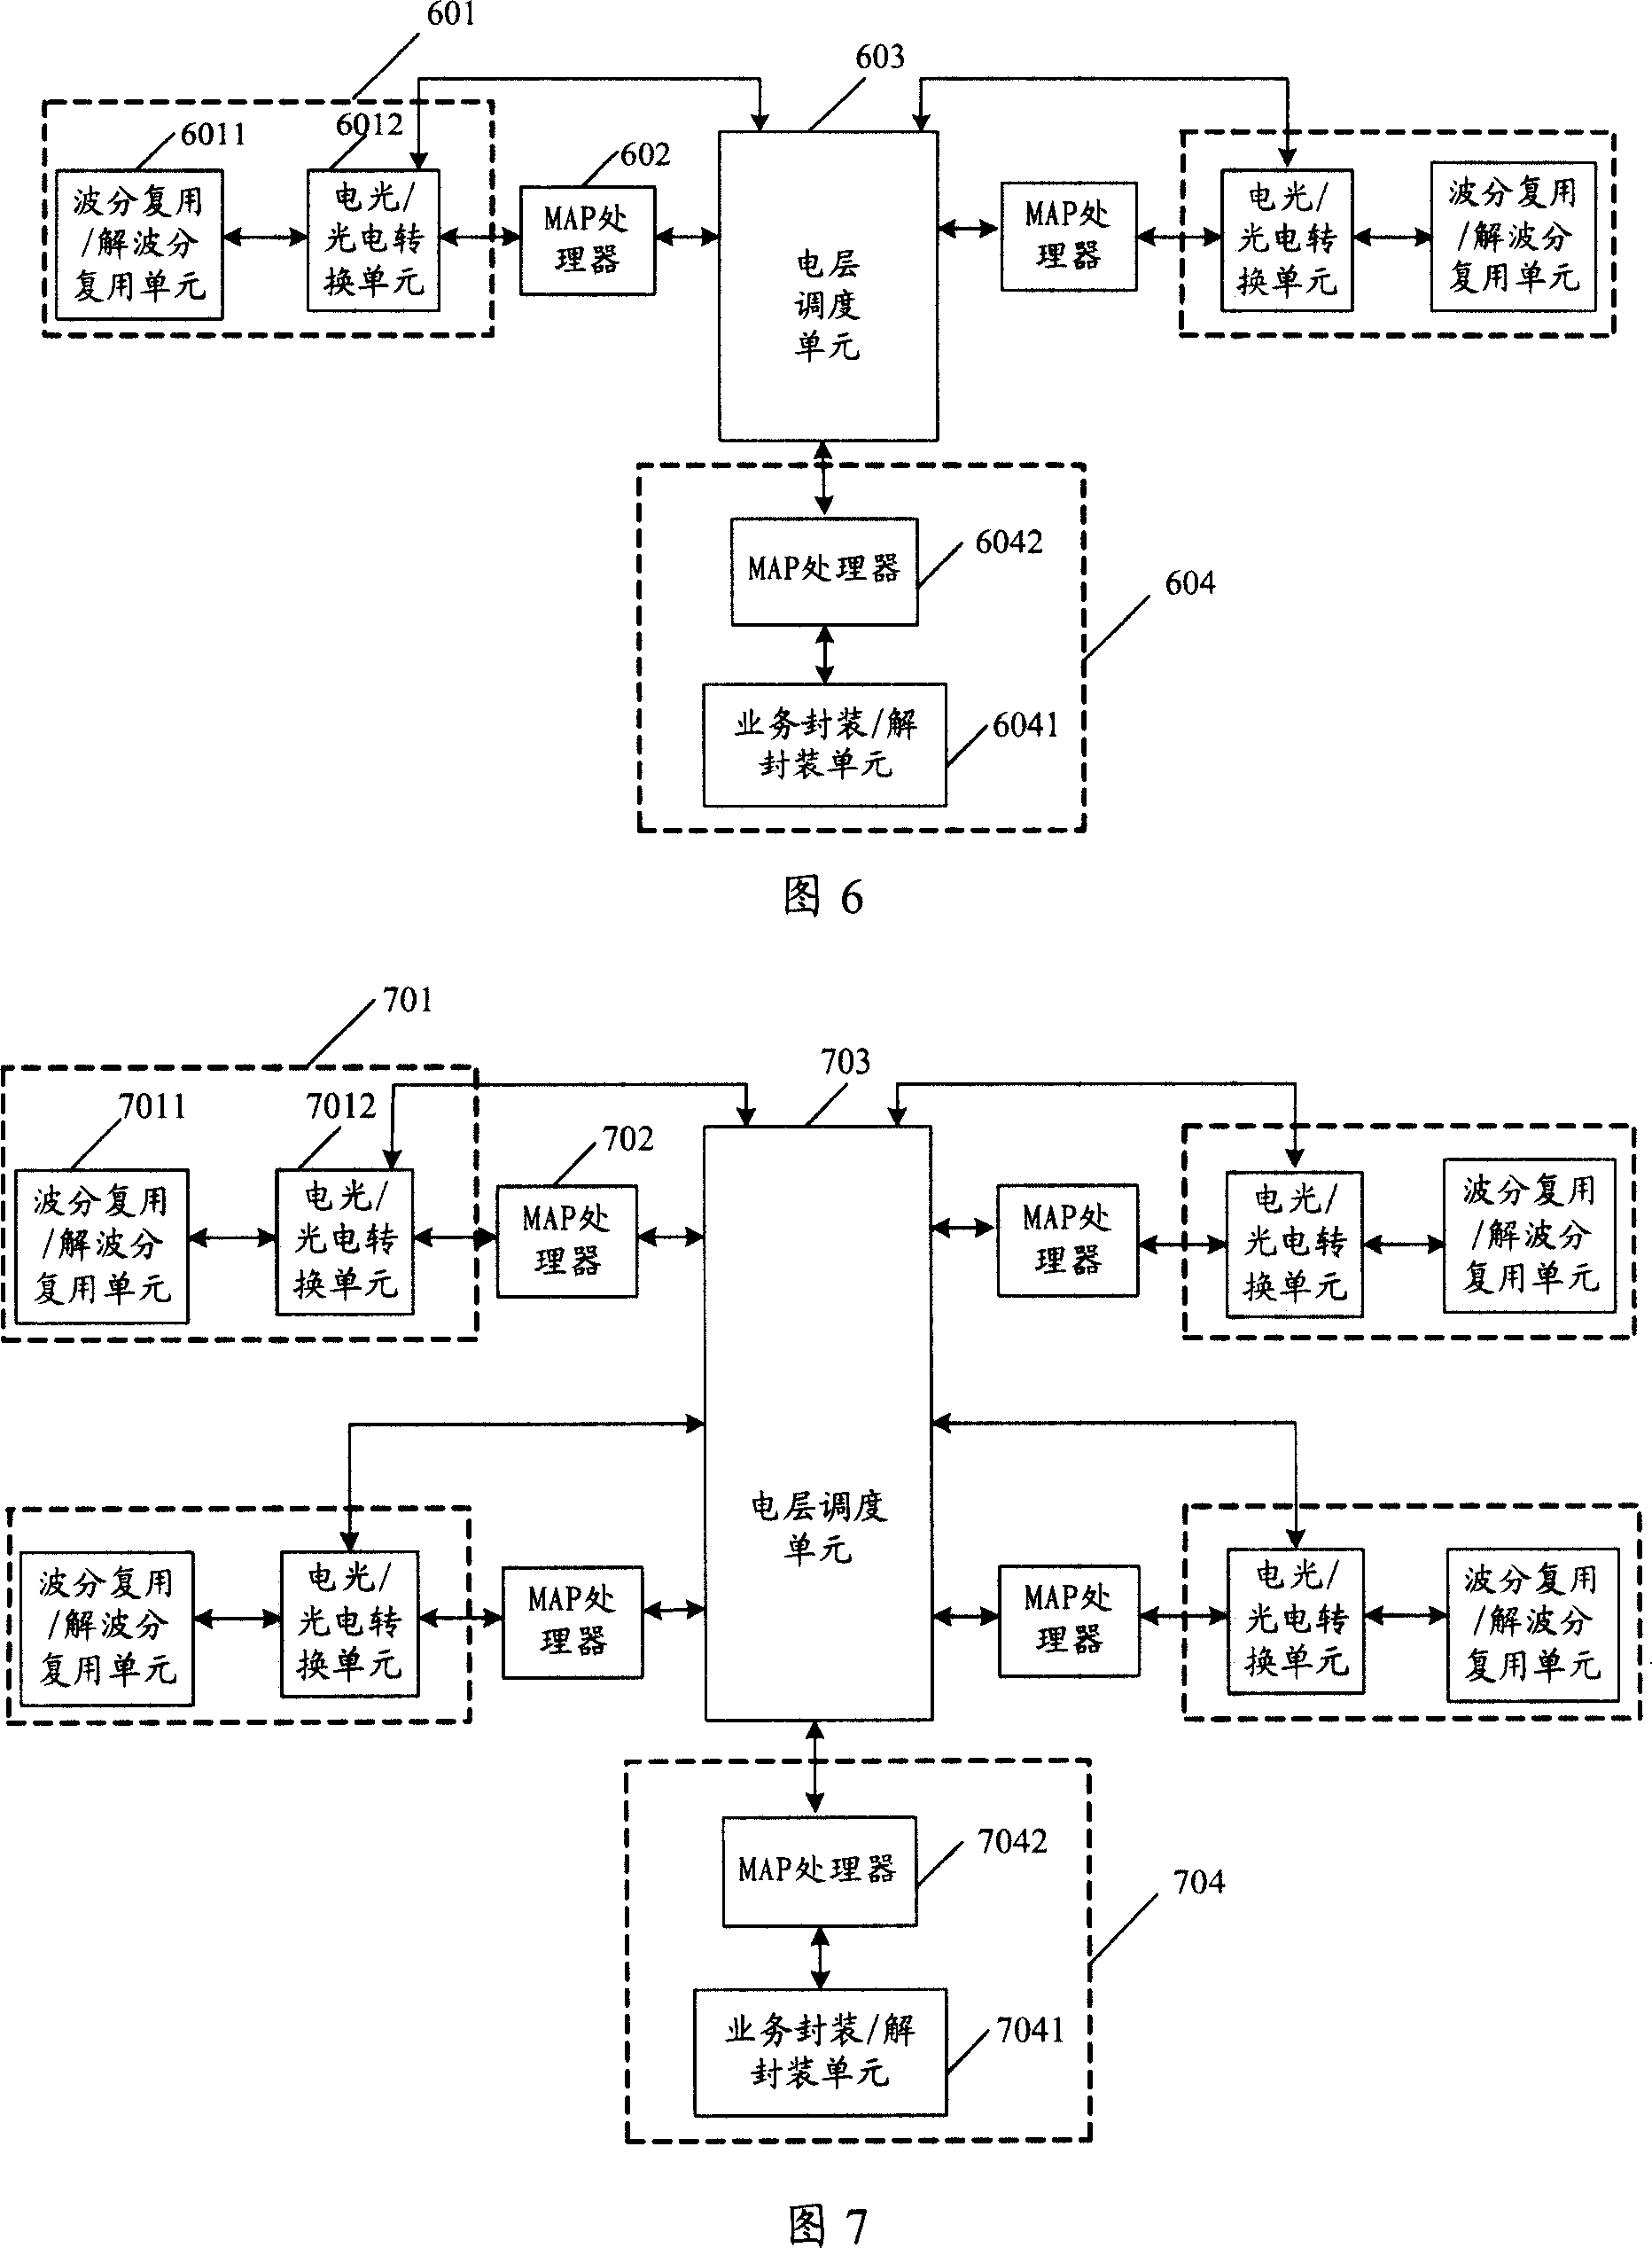 Dispatching device and method in optical communication network